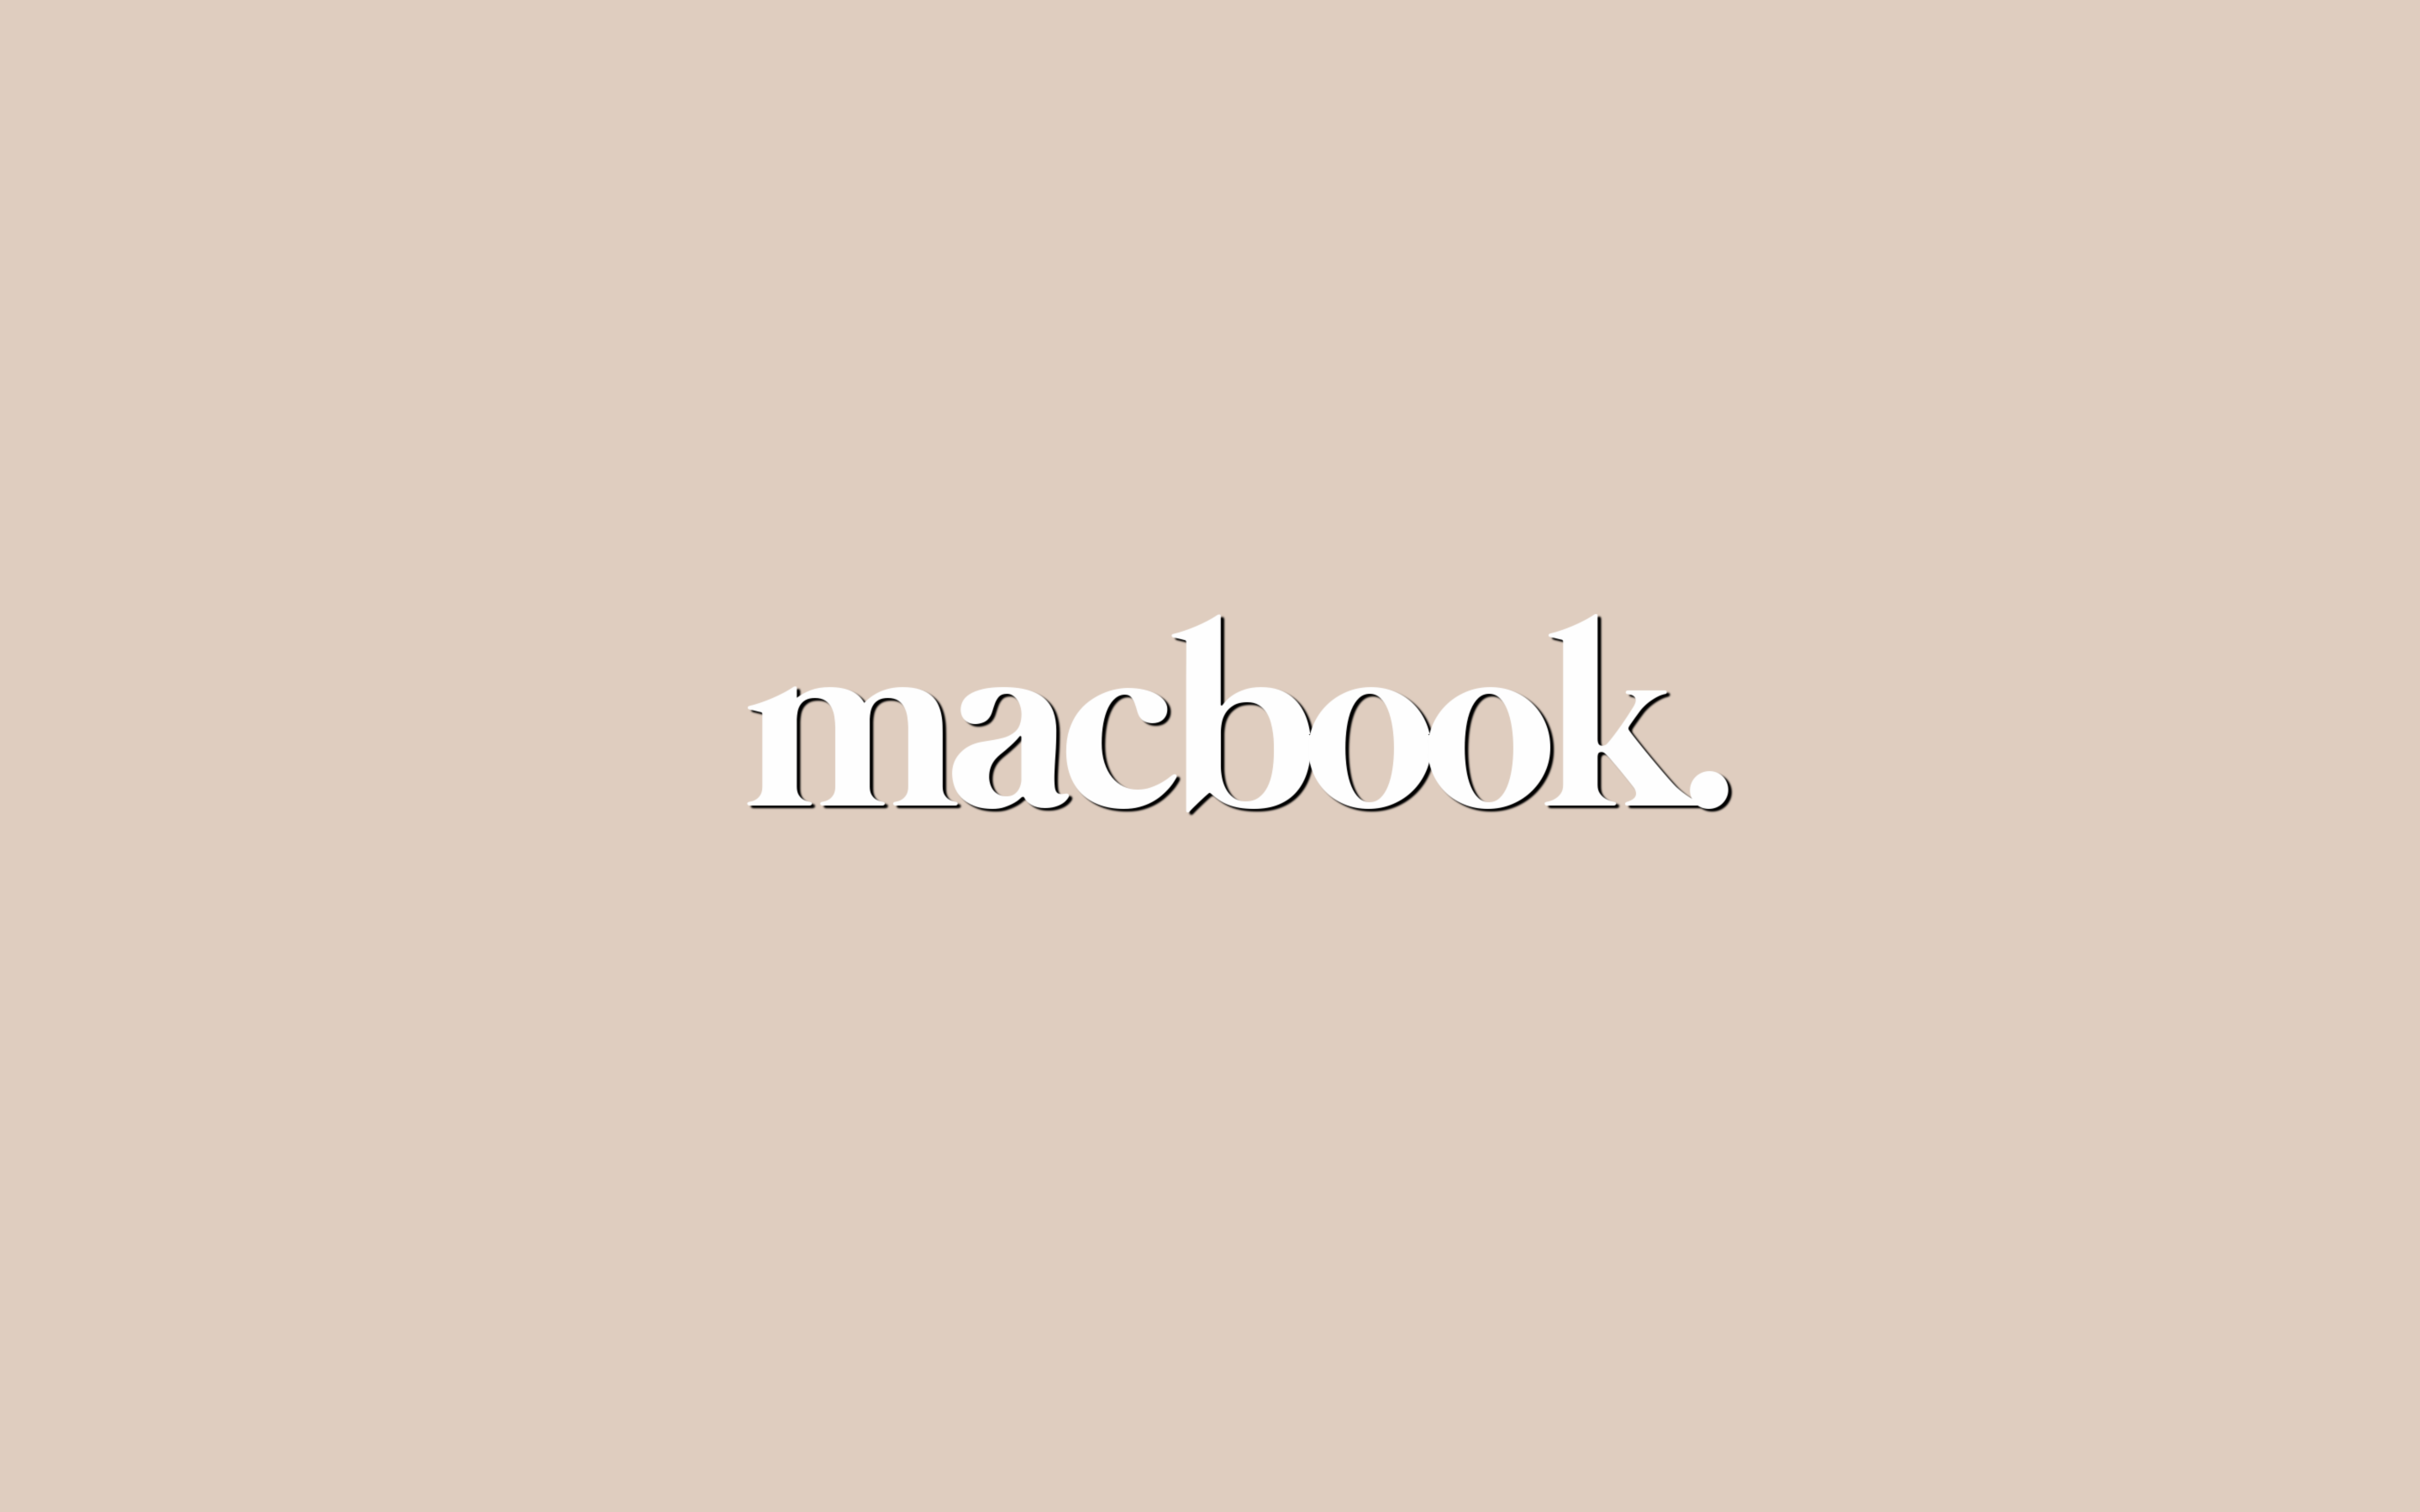 FREE macbook high res background for your macbook or desktop computer! Cute, aesthetic designs